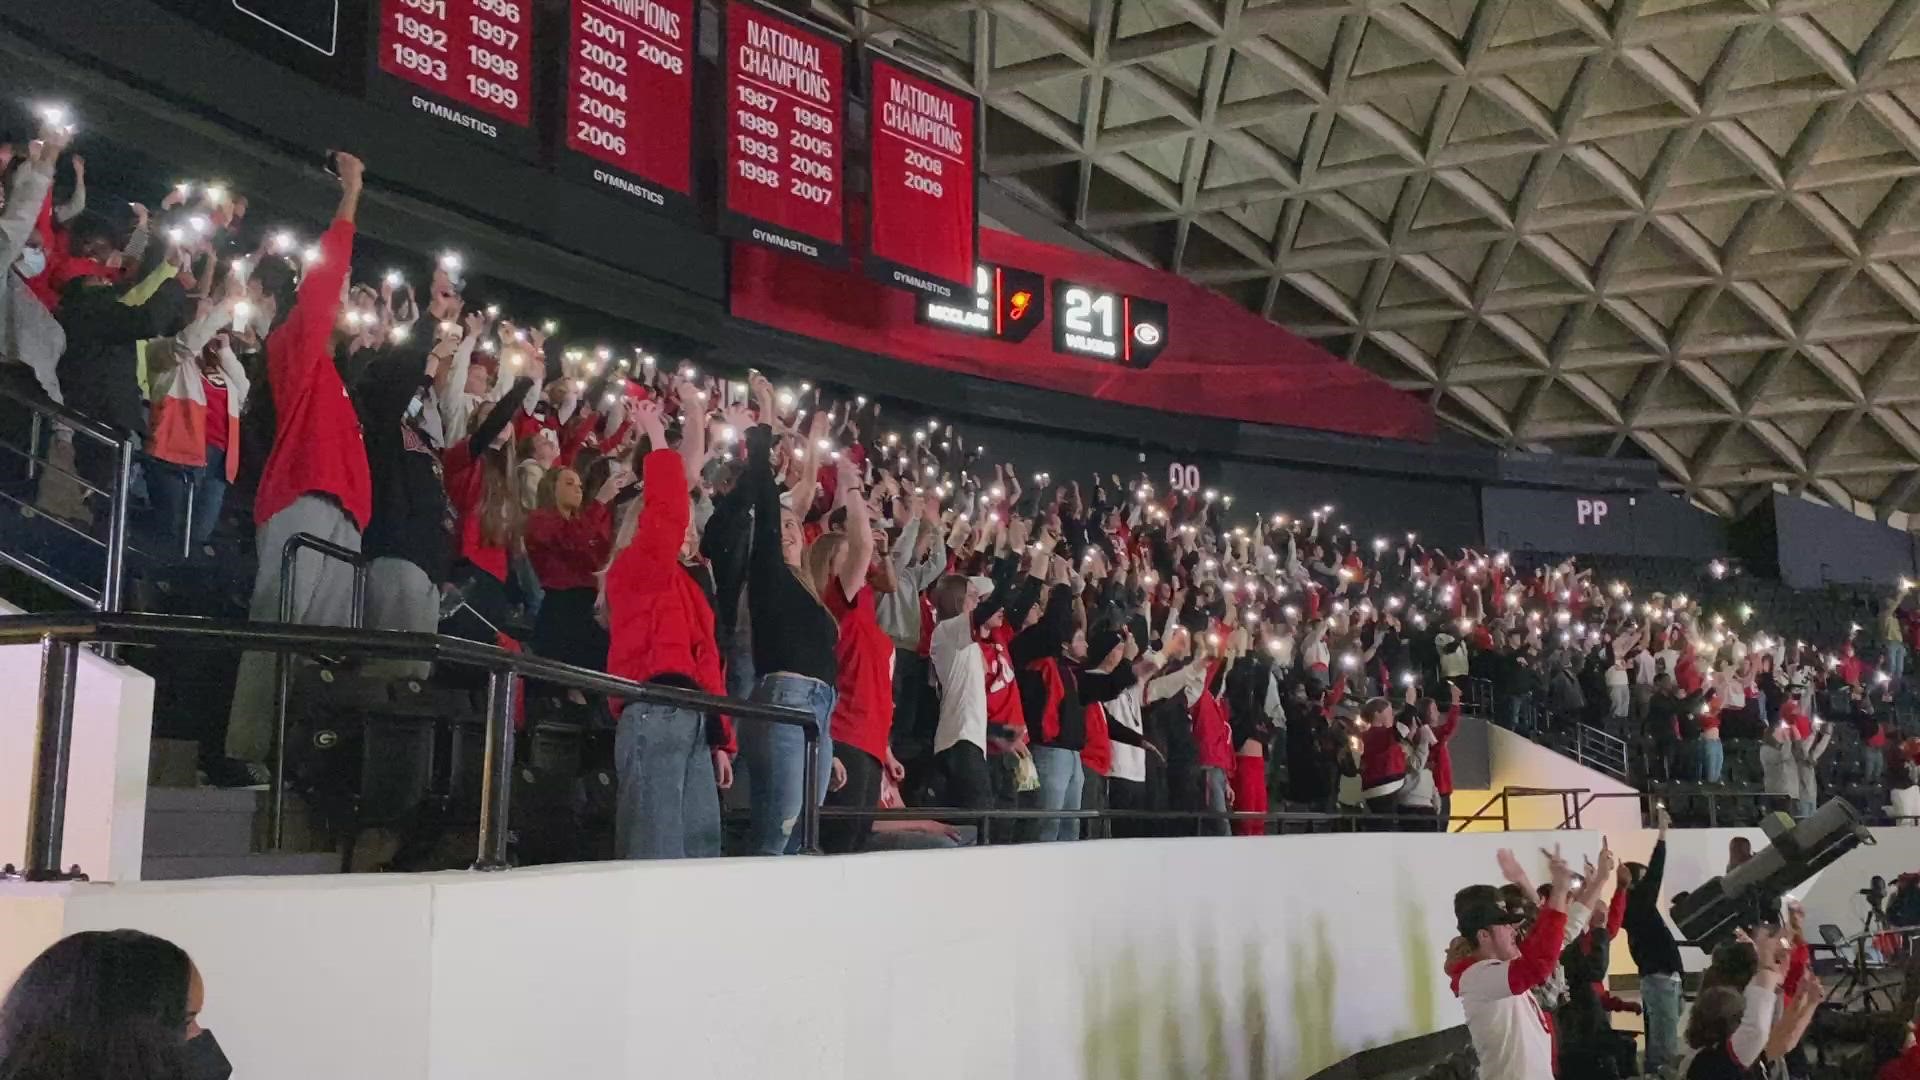 As Georgia took on Alabama for the SEC National Championship, students in Athens cheered on the team from Stegeman Coliseum.